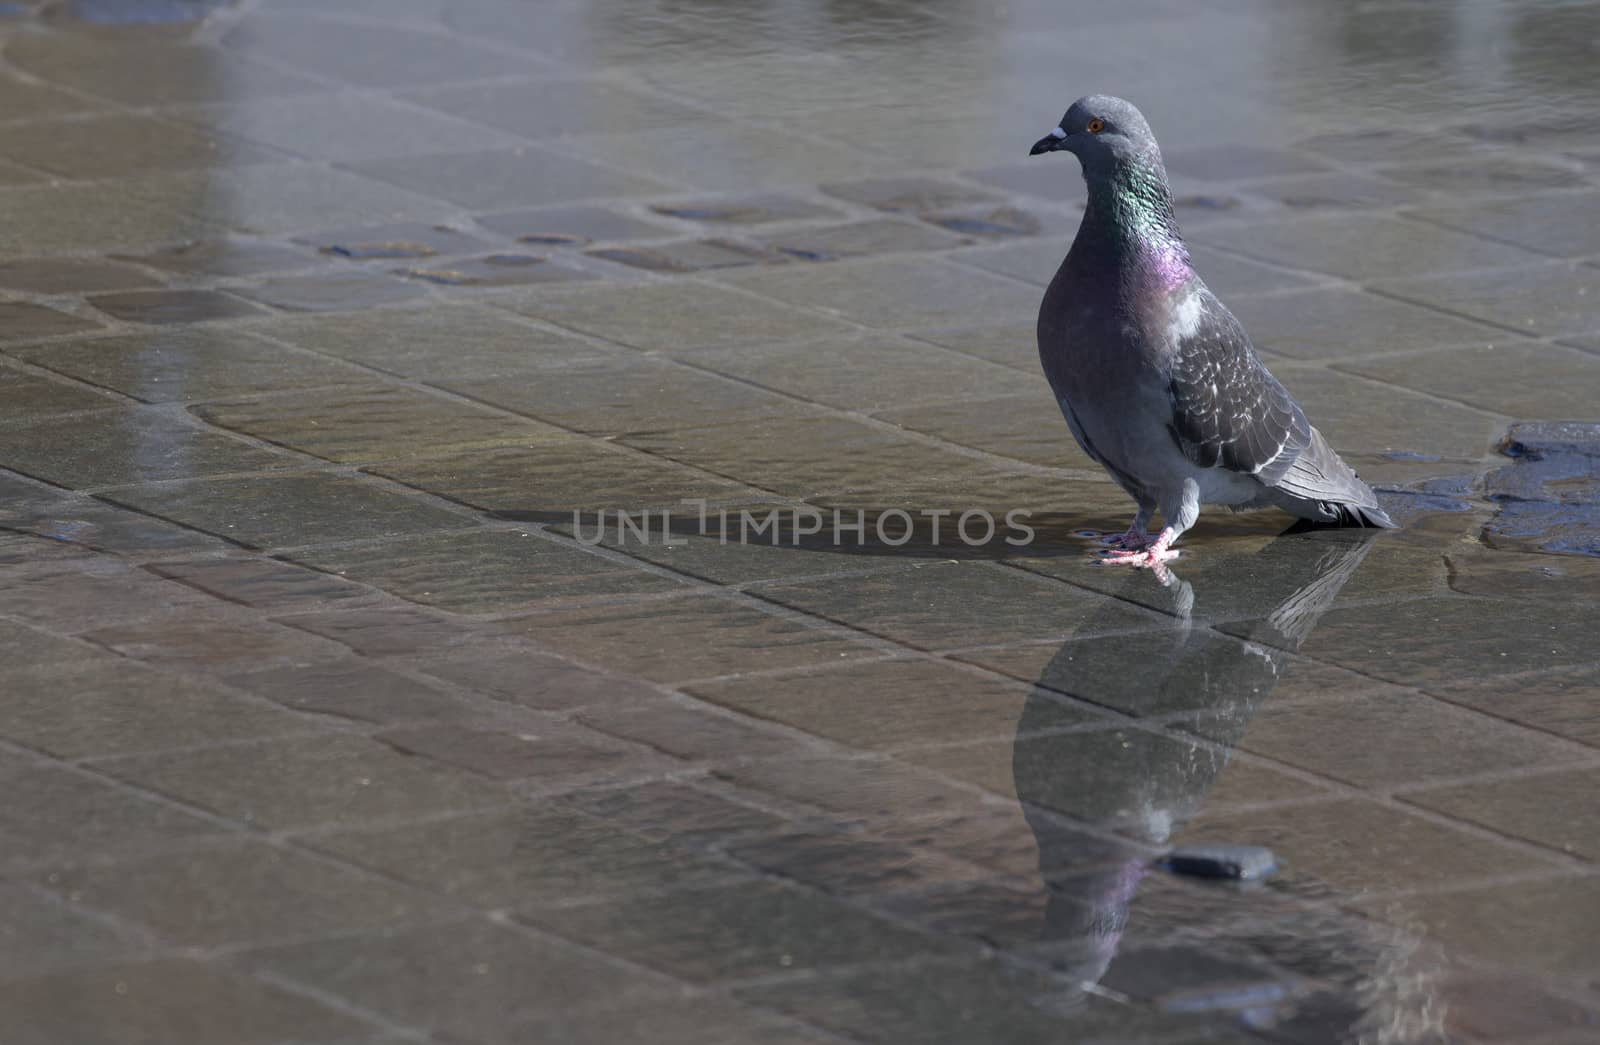 colorful pigeon with its water reflection standing on cubic asphalt